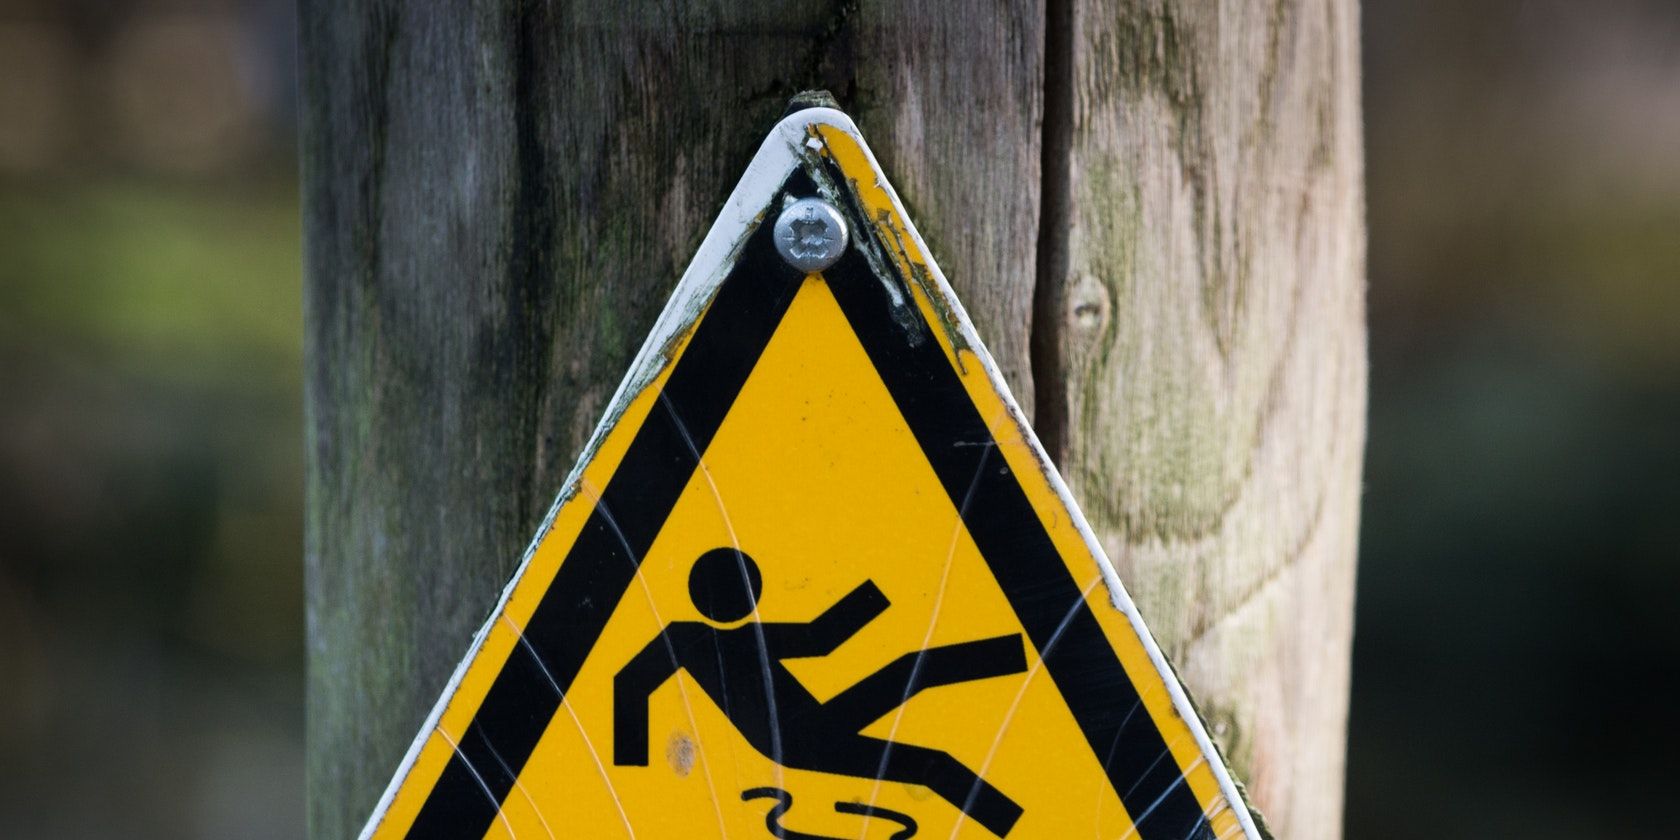 Triangular warning sign with an image of a person falling over.